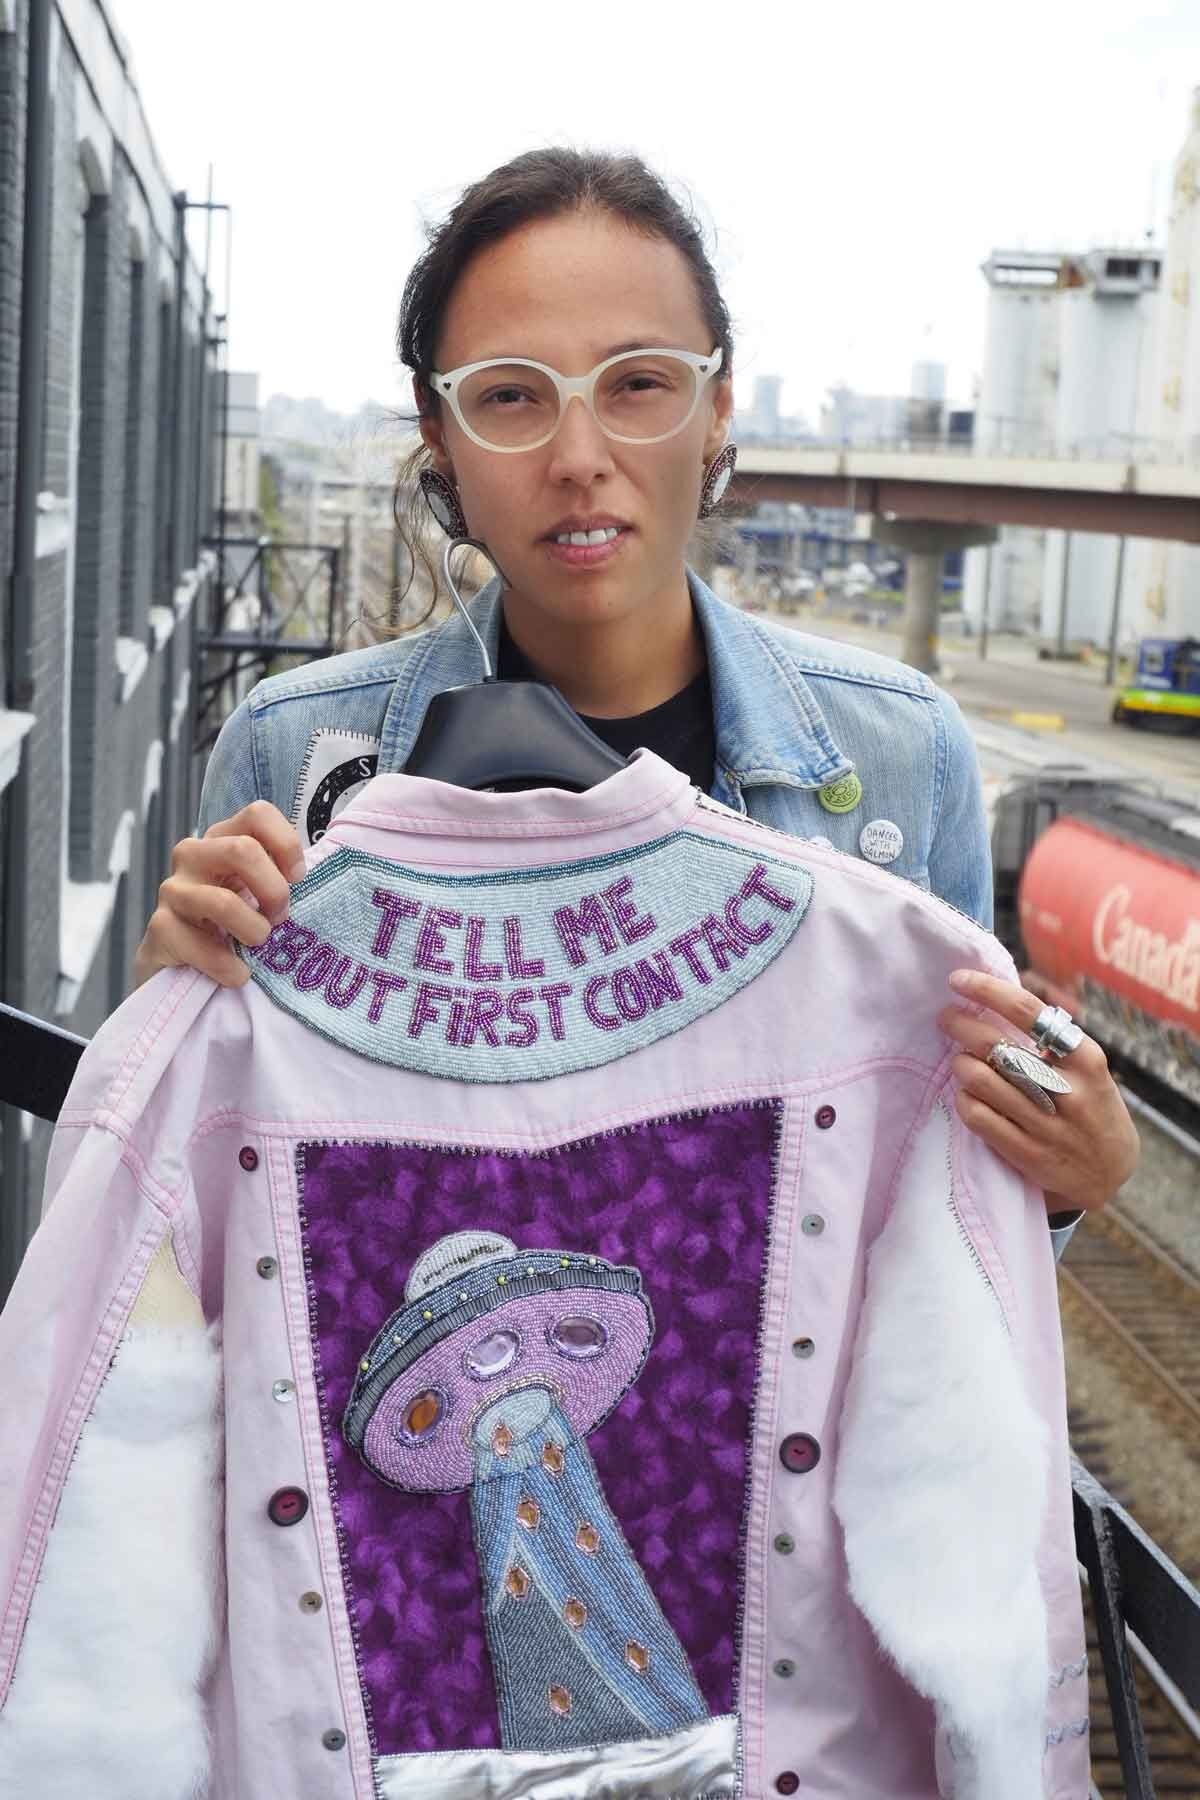 Whess Harman weating glasses stares directly into the camera holding a pink leather jacket that has "TELL ME ABOUT FIRST CONTACT"embroidered in pink and blue sequins on the upper shoulder panel of the jacket and a UFO with an abduction beam similarly embroidered just beneath